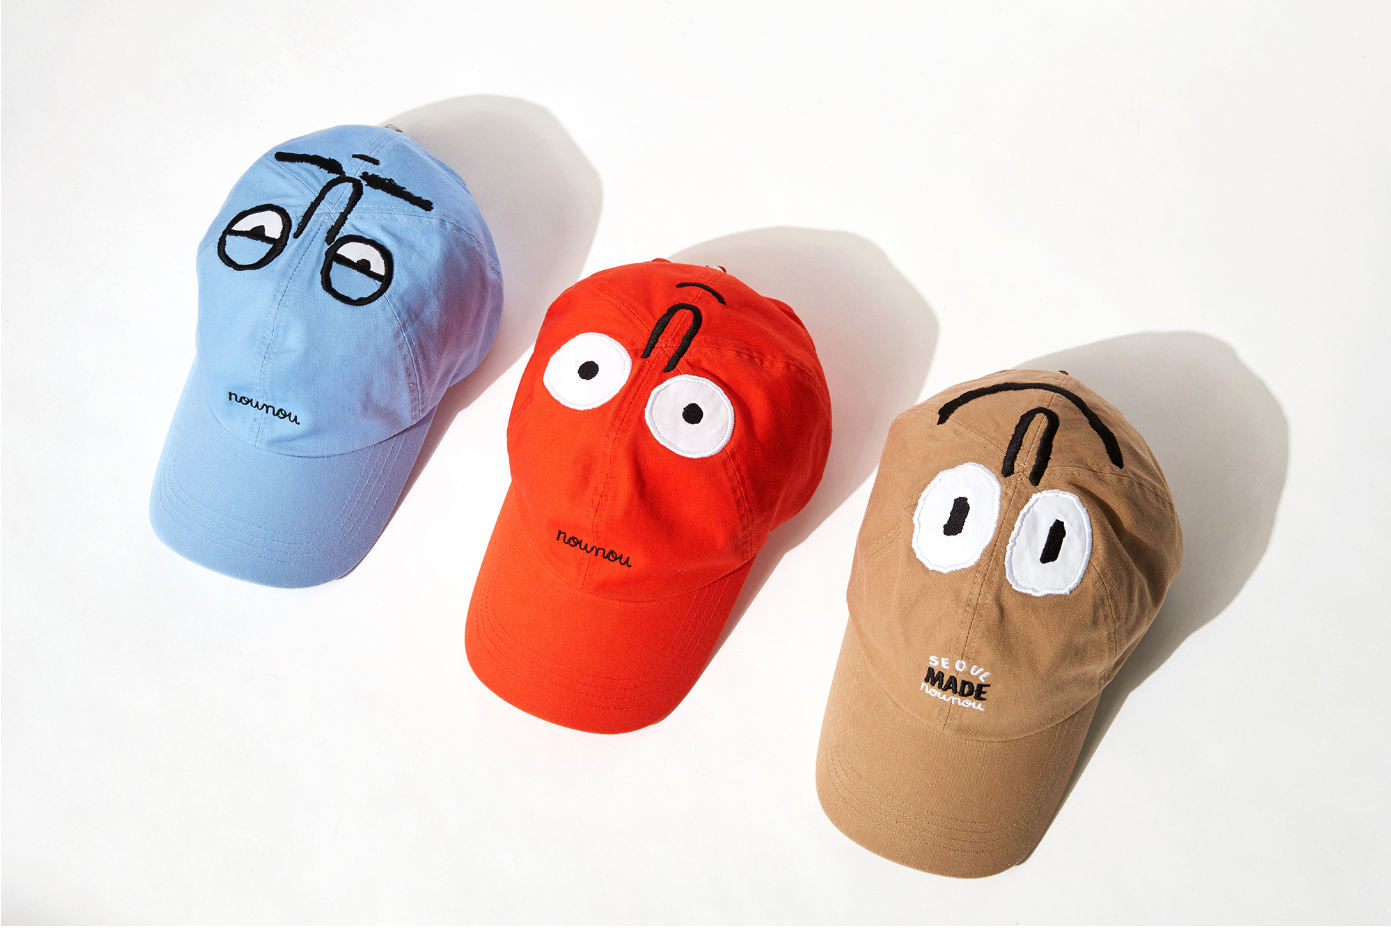 10 fashion accessories of "SEOULMADE NouNou by Jean Jullien & Jae Huh" including hats and t-shirts released